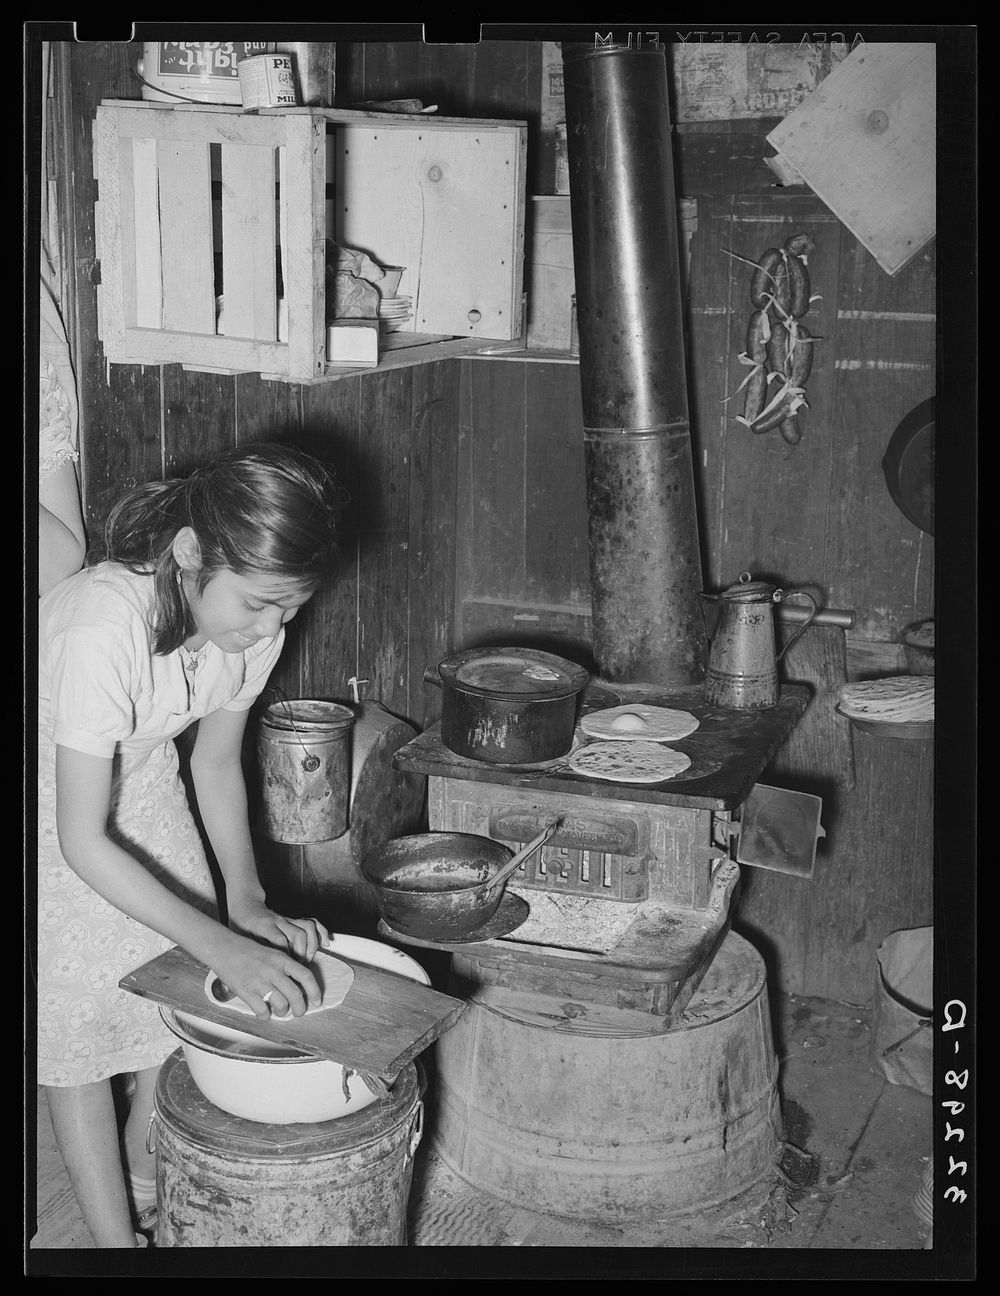 Mexican girl living in corral making tortillas. Tortillas can be seen baking on the stove. Robstown, Texas by Russell Lee